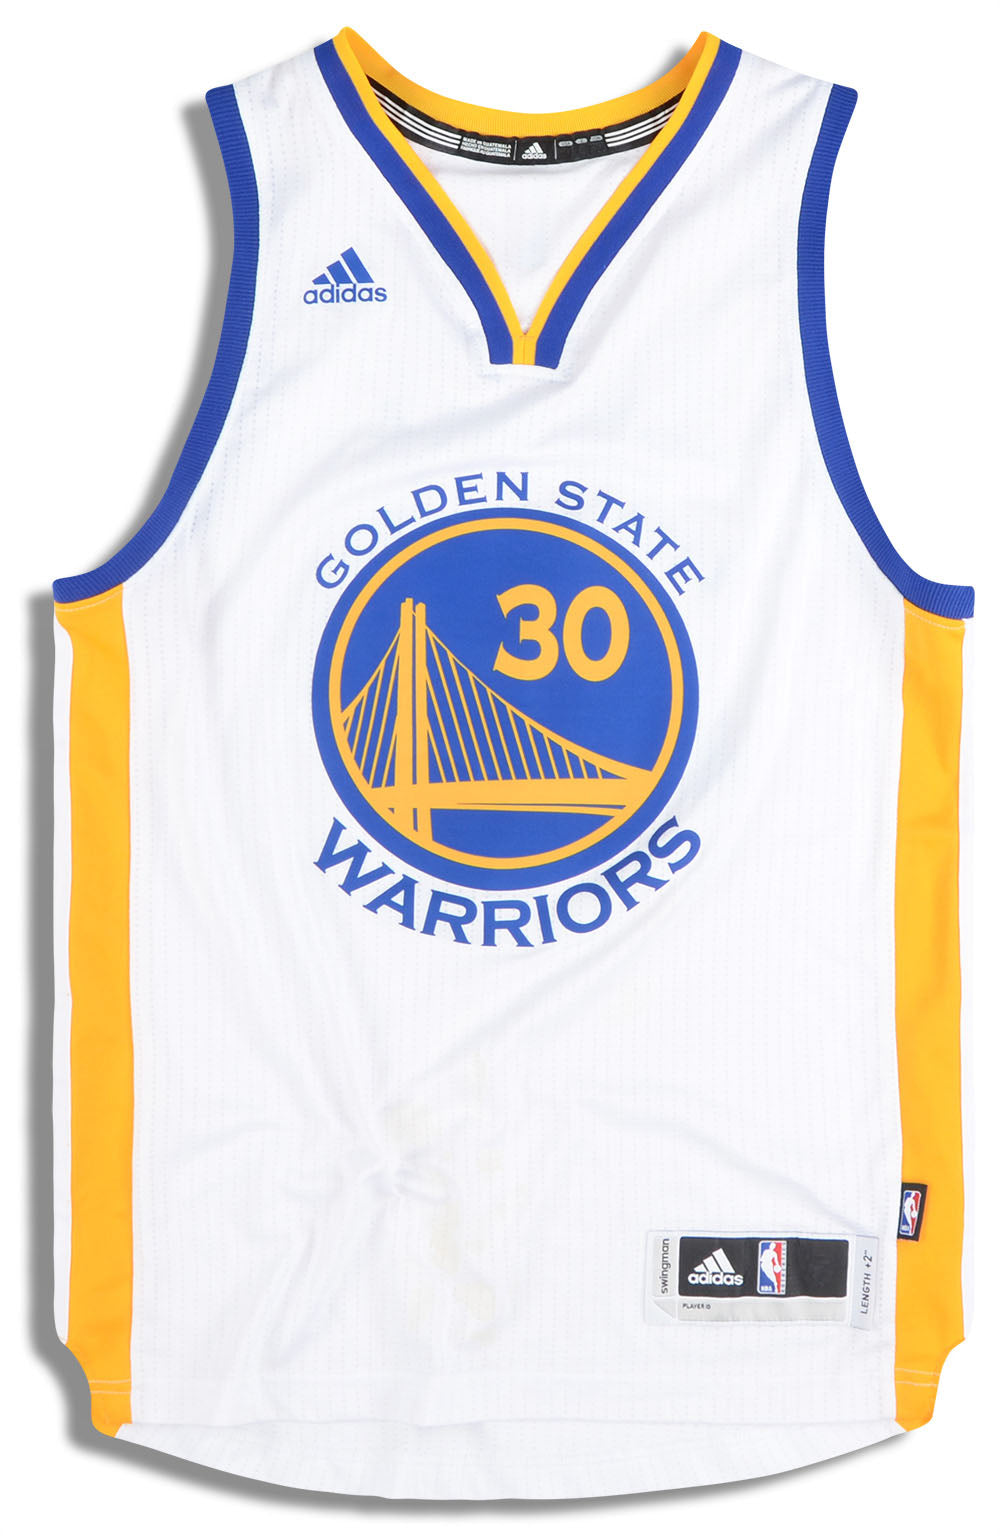 Adidas Golden State Warriors Kevin Durant Swingman Jersey Size M